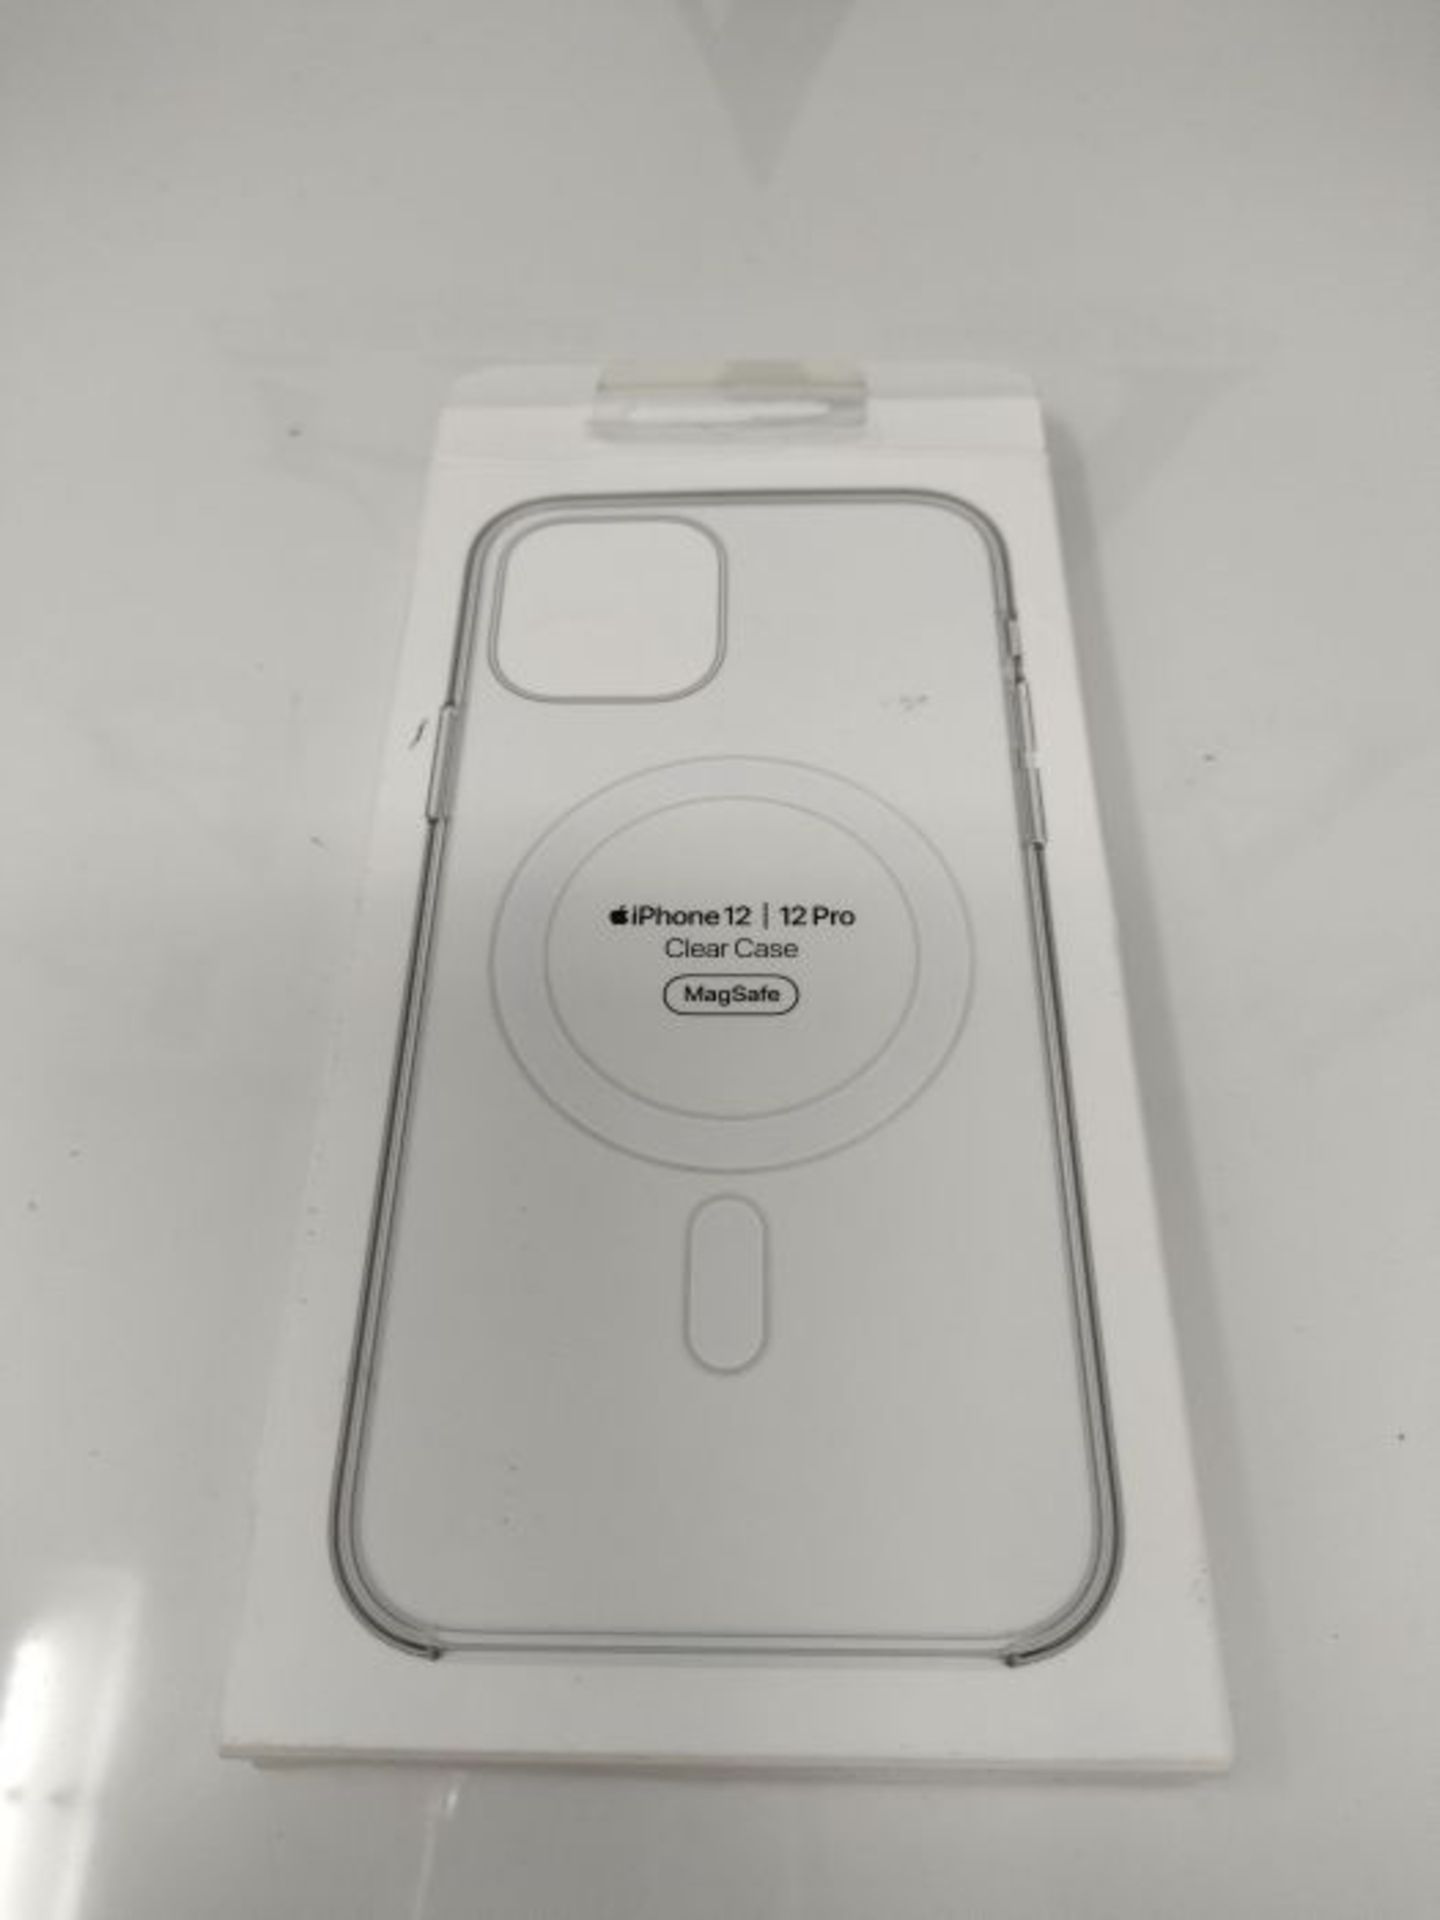 Apple Clear Case (for iPhone 12 | 12 Pro) - 6.1 inches - Image 2 of 3